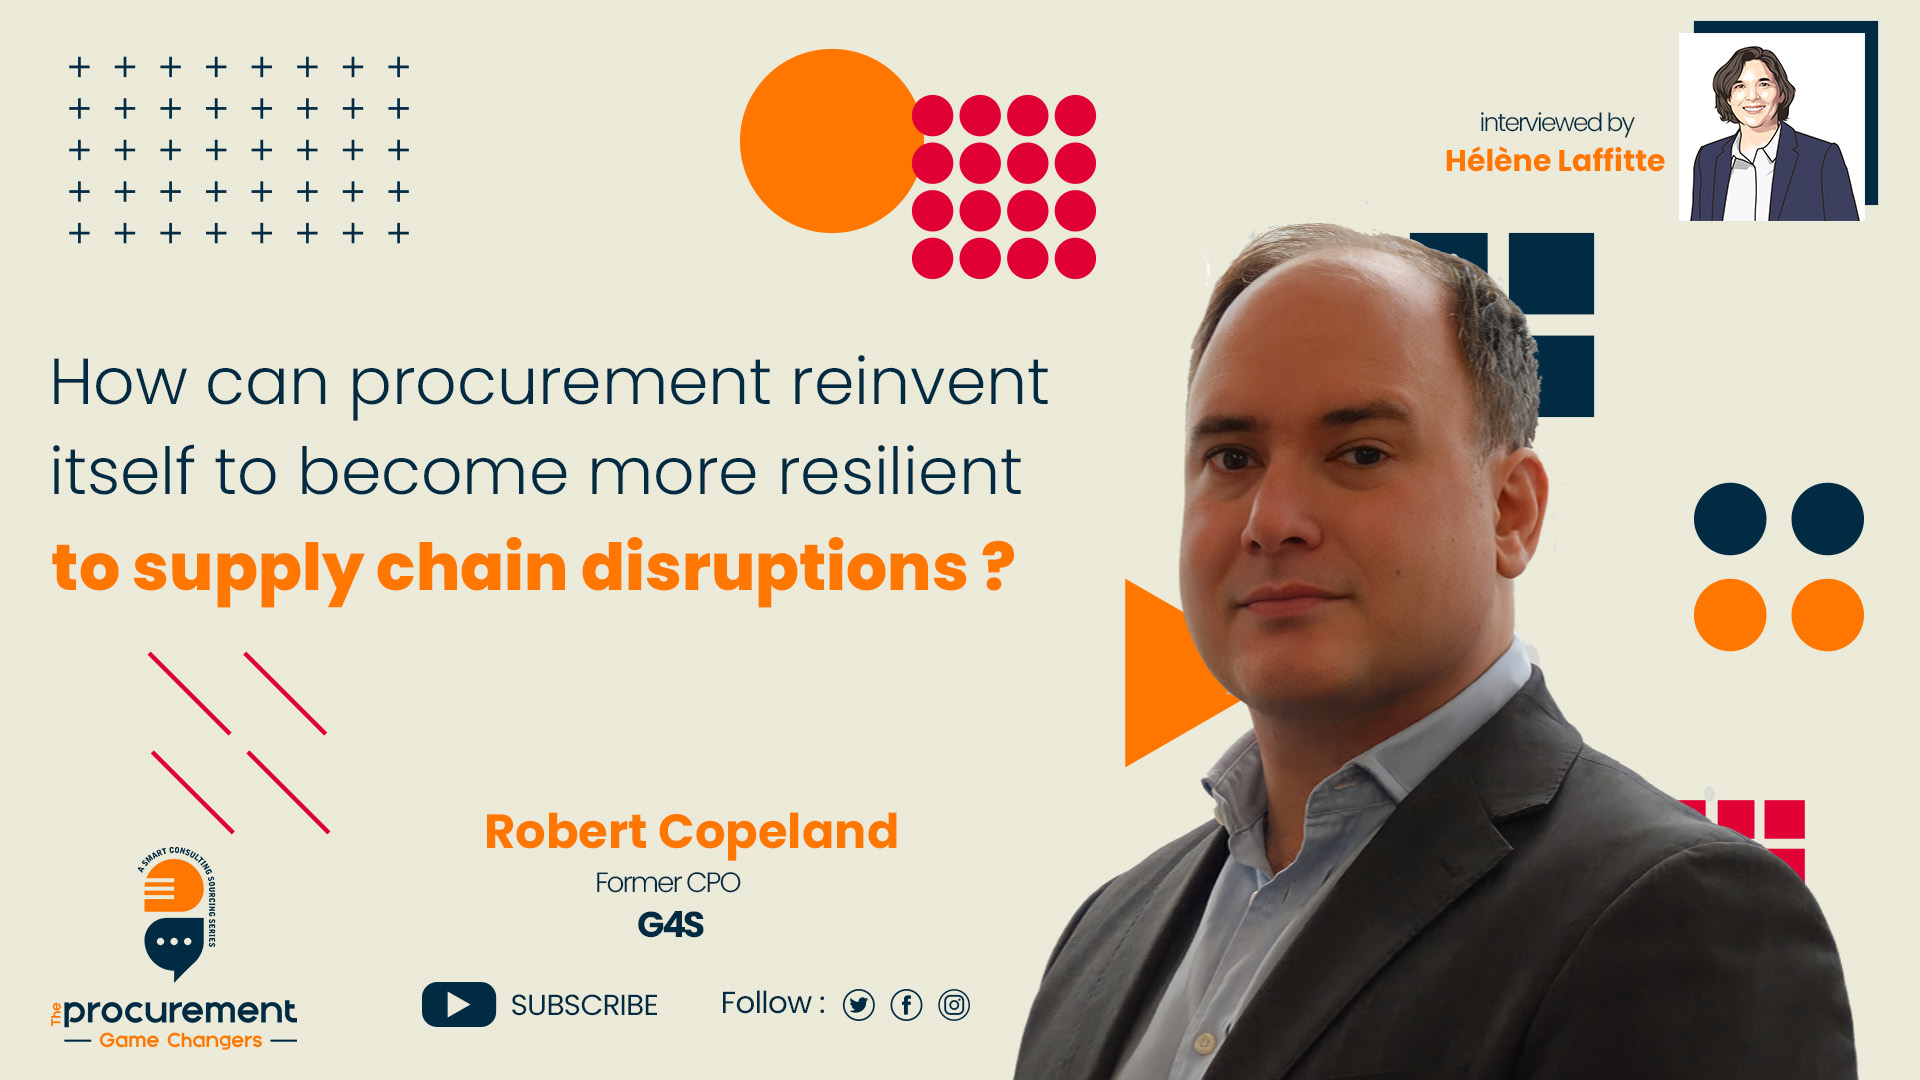 How can Procurement reinvent itself to become more resilient to supply chain disruptions?